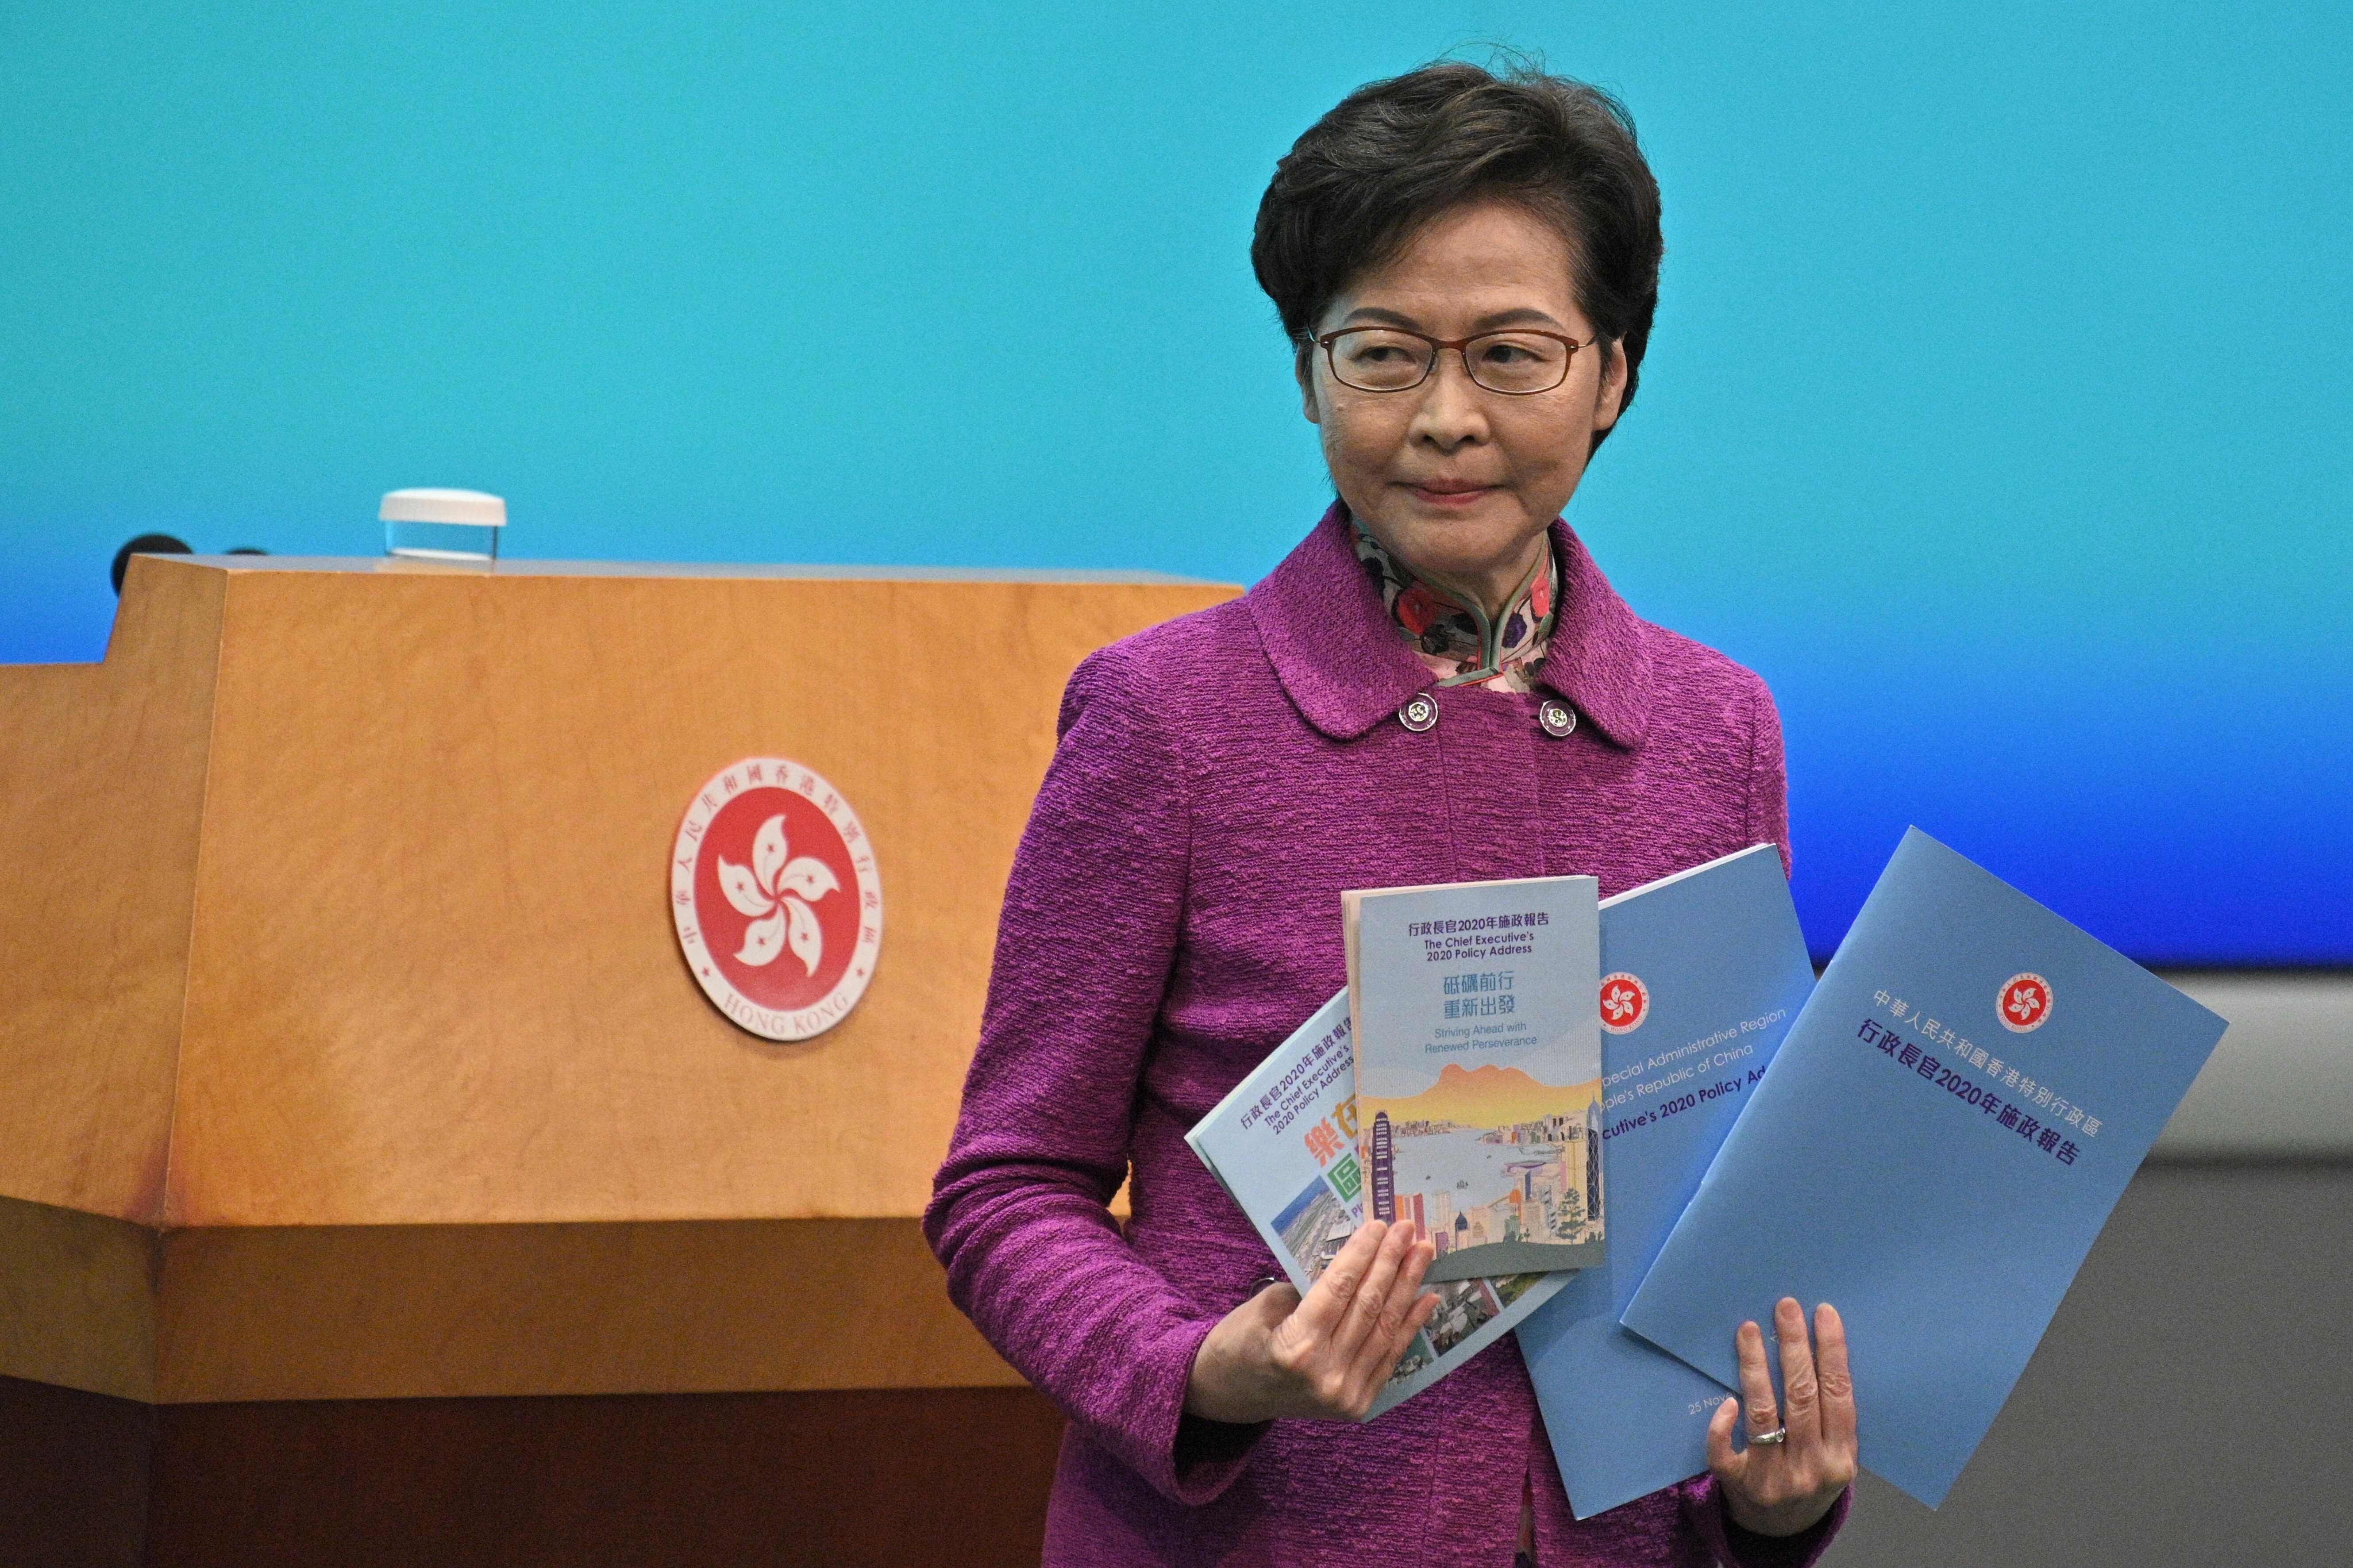 Hong Kong Chief Executive Carrie Lam arrives for a press conference after delivering her annual policy address earlier at the Legislative Council. Photo: AFP